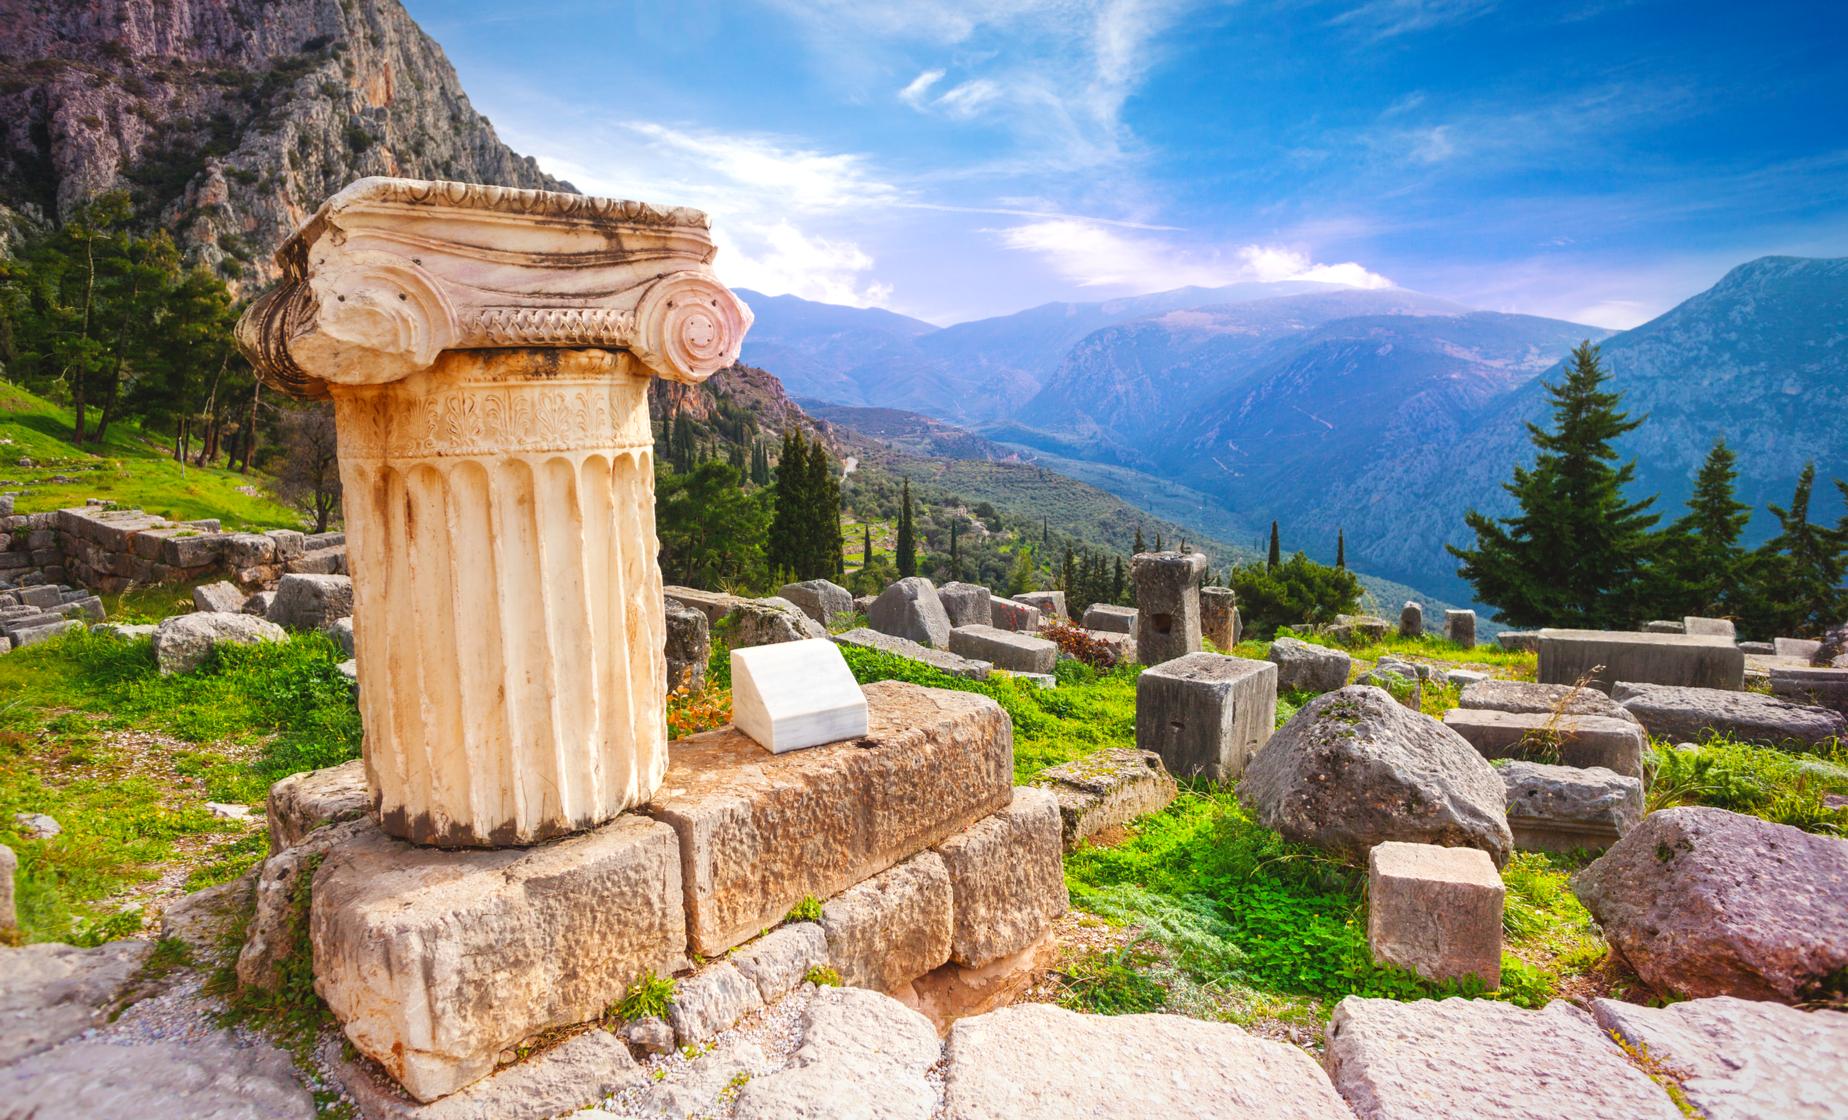 Private Delphi The Navel of the Earth Tour from Athens (Sacred Way, Temple of Apollo)